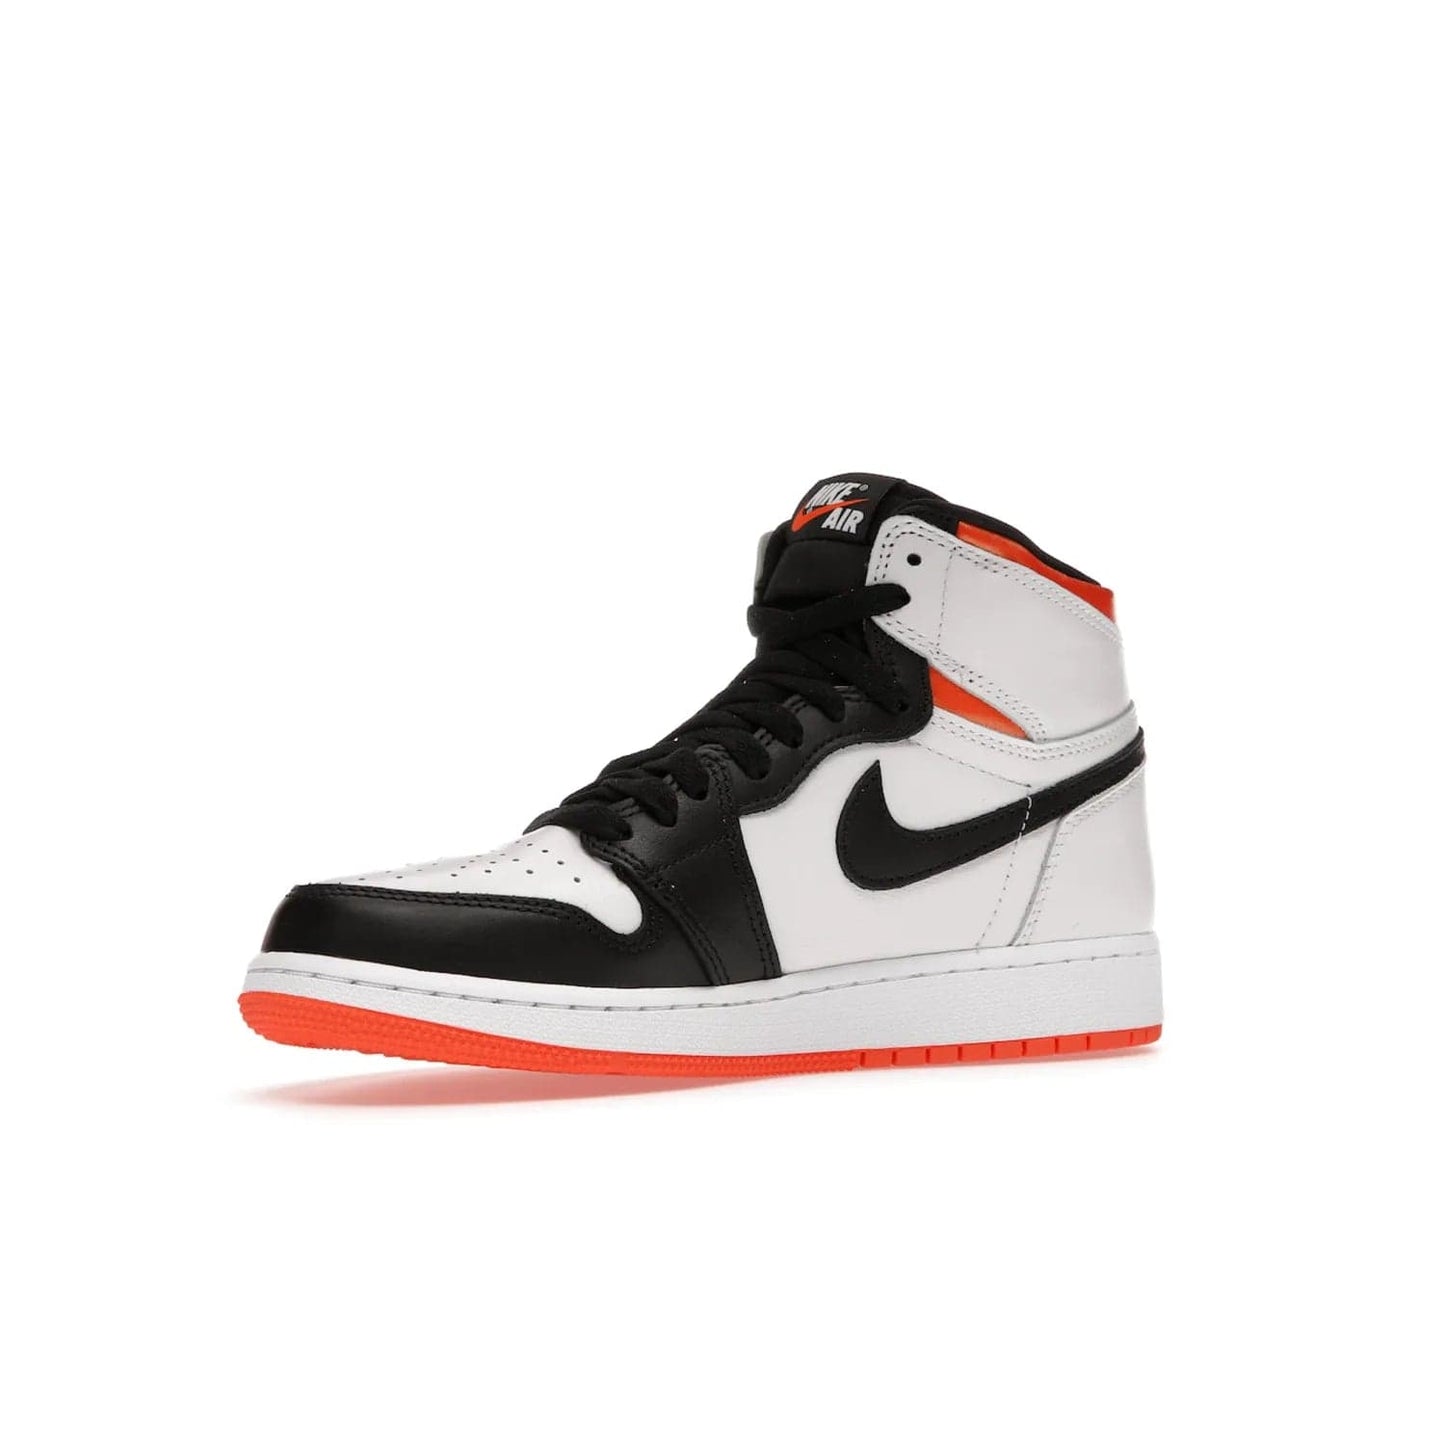 Jordan 1 High OG Electro Orange (GS) - Image 16 - Only at www.BallersClubKickz.com - The Air Jordan 1 High OG Electro Orange GS is the ideal shoe for kids on the go. Featuring white leather uppers, black overlays, and bright orange accents, it's sure to become a favorite. A great mix of classic style and vibrant colors, the shoe delivers air cushioning for comfort and hard orange rubber for grip. Release on July 17th, 2021. Get them a pair today.